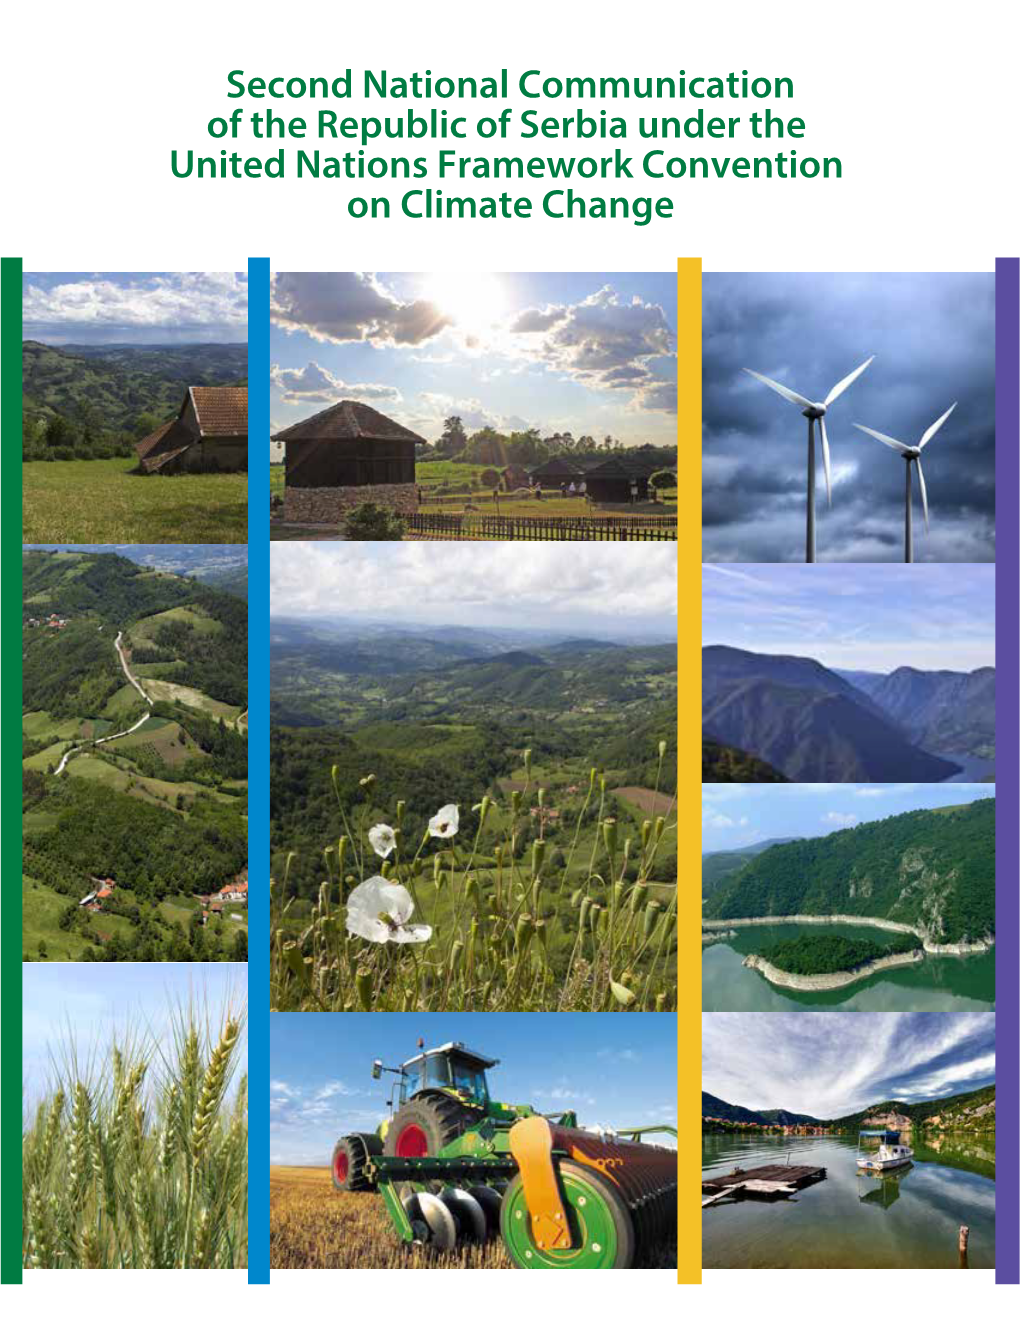 Second National Communication of the Republic of Serbia Under the United Nations Framework Convention on Climate Change